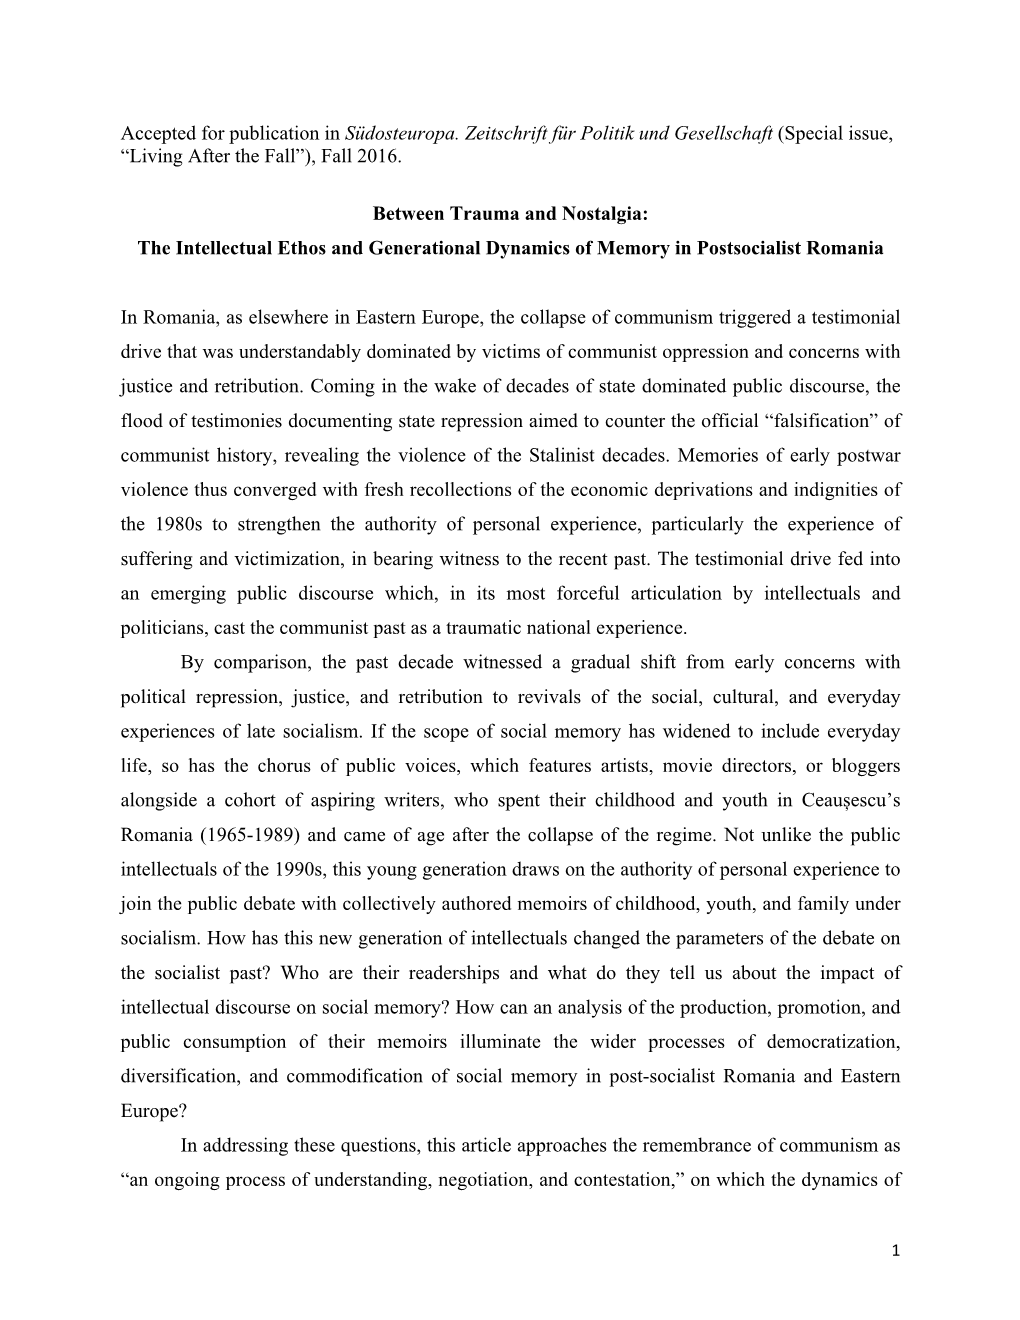 Accepted for Publication in Südosteuropa